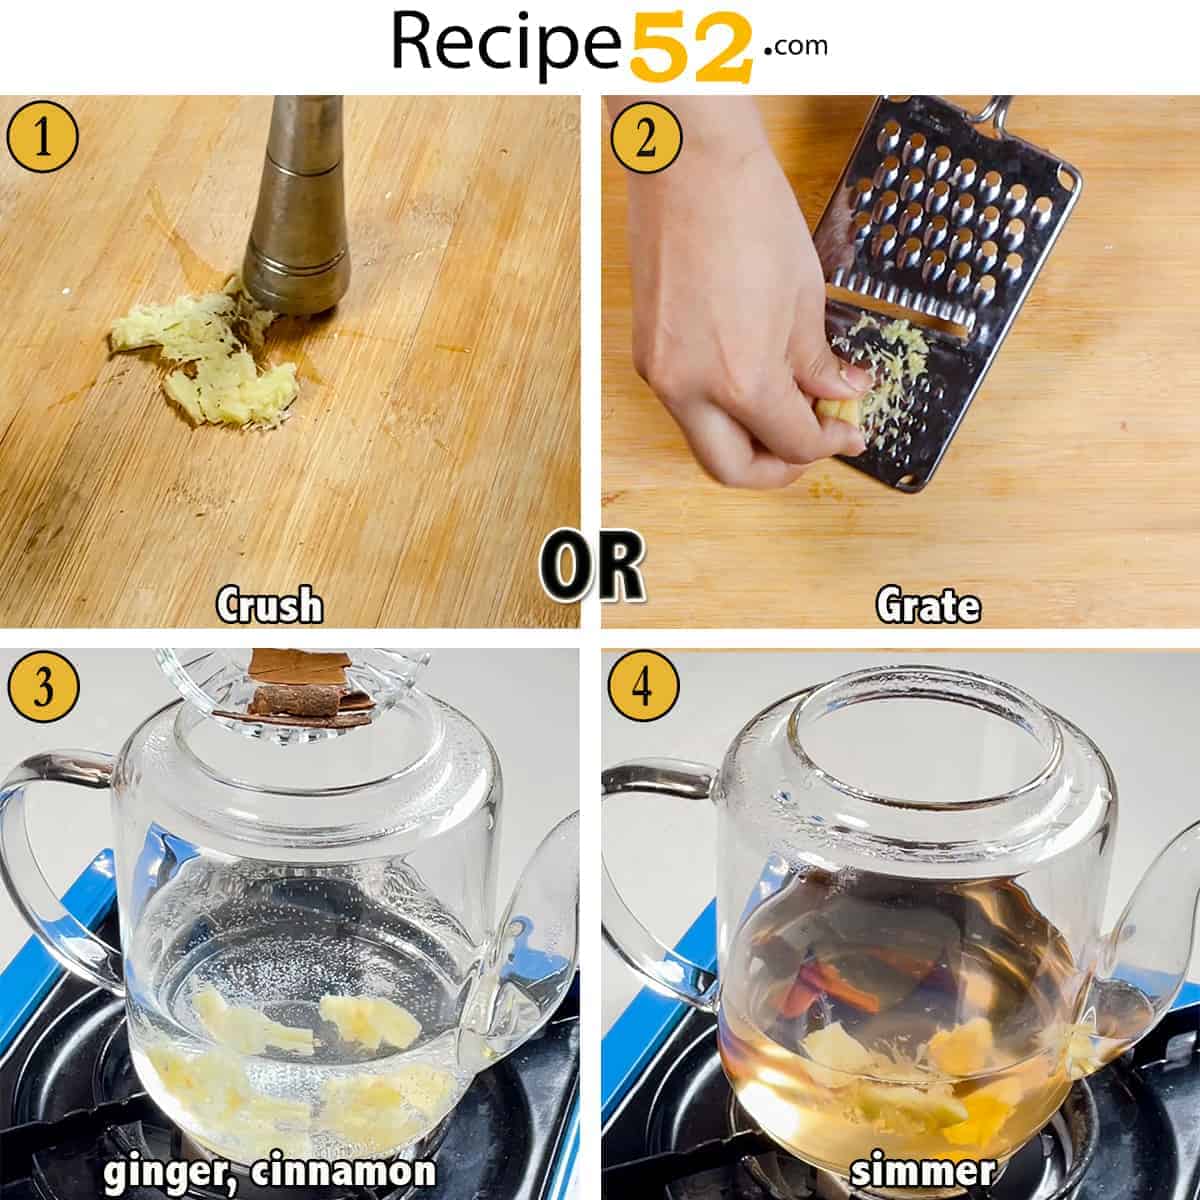 Step to grate ginger and make tea.